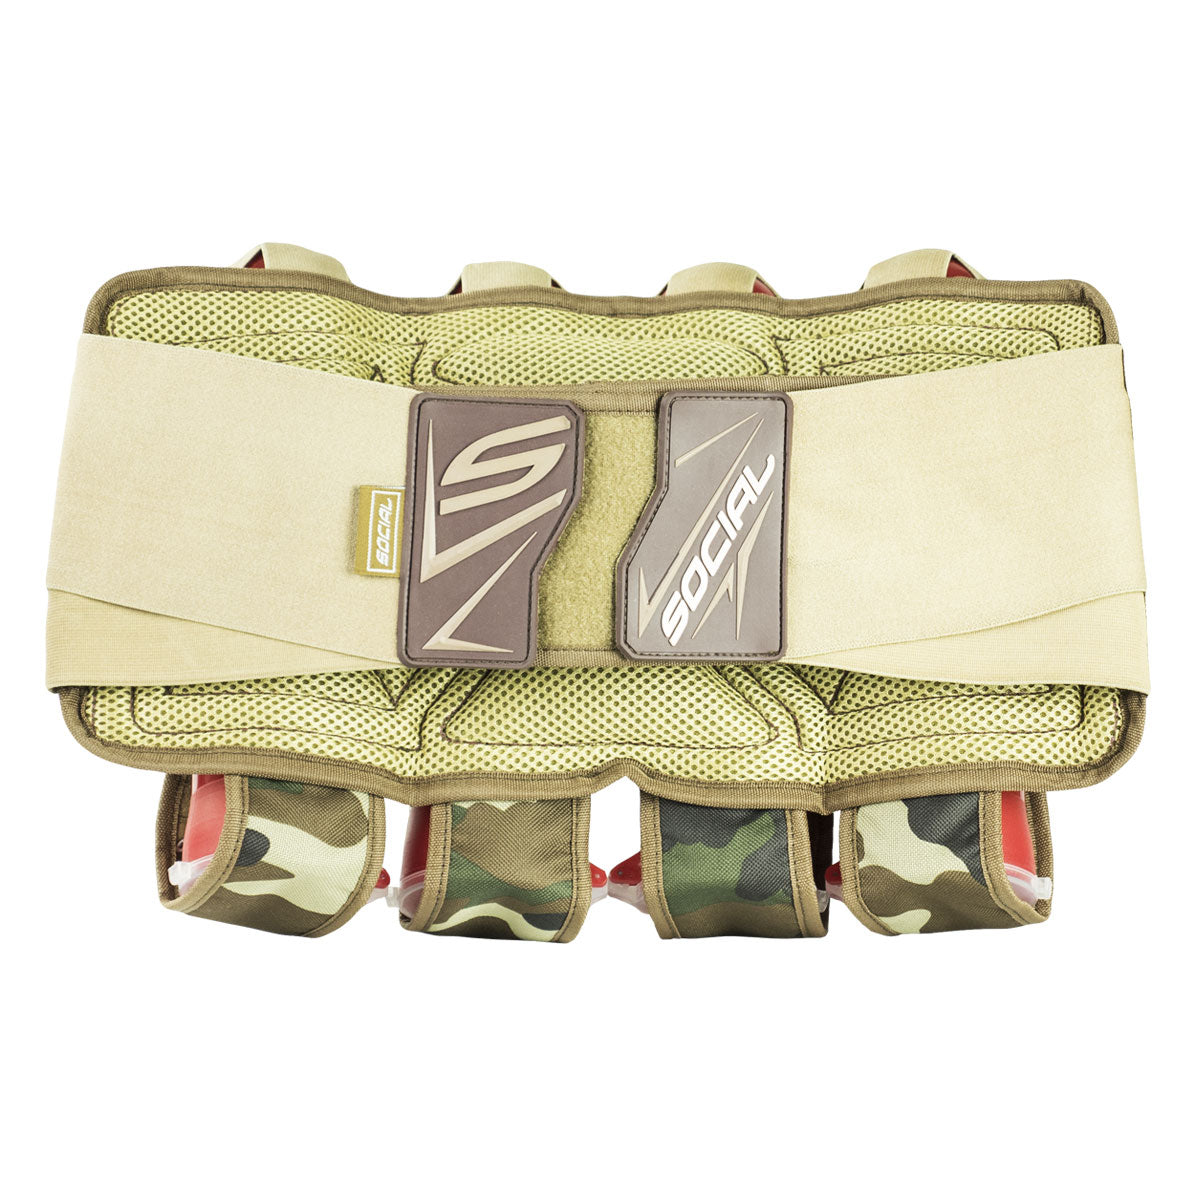 Social Paintball Grit Pack Harness 4+7 - Coyote Tan Woodland - Social Paintball